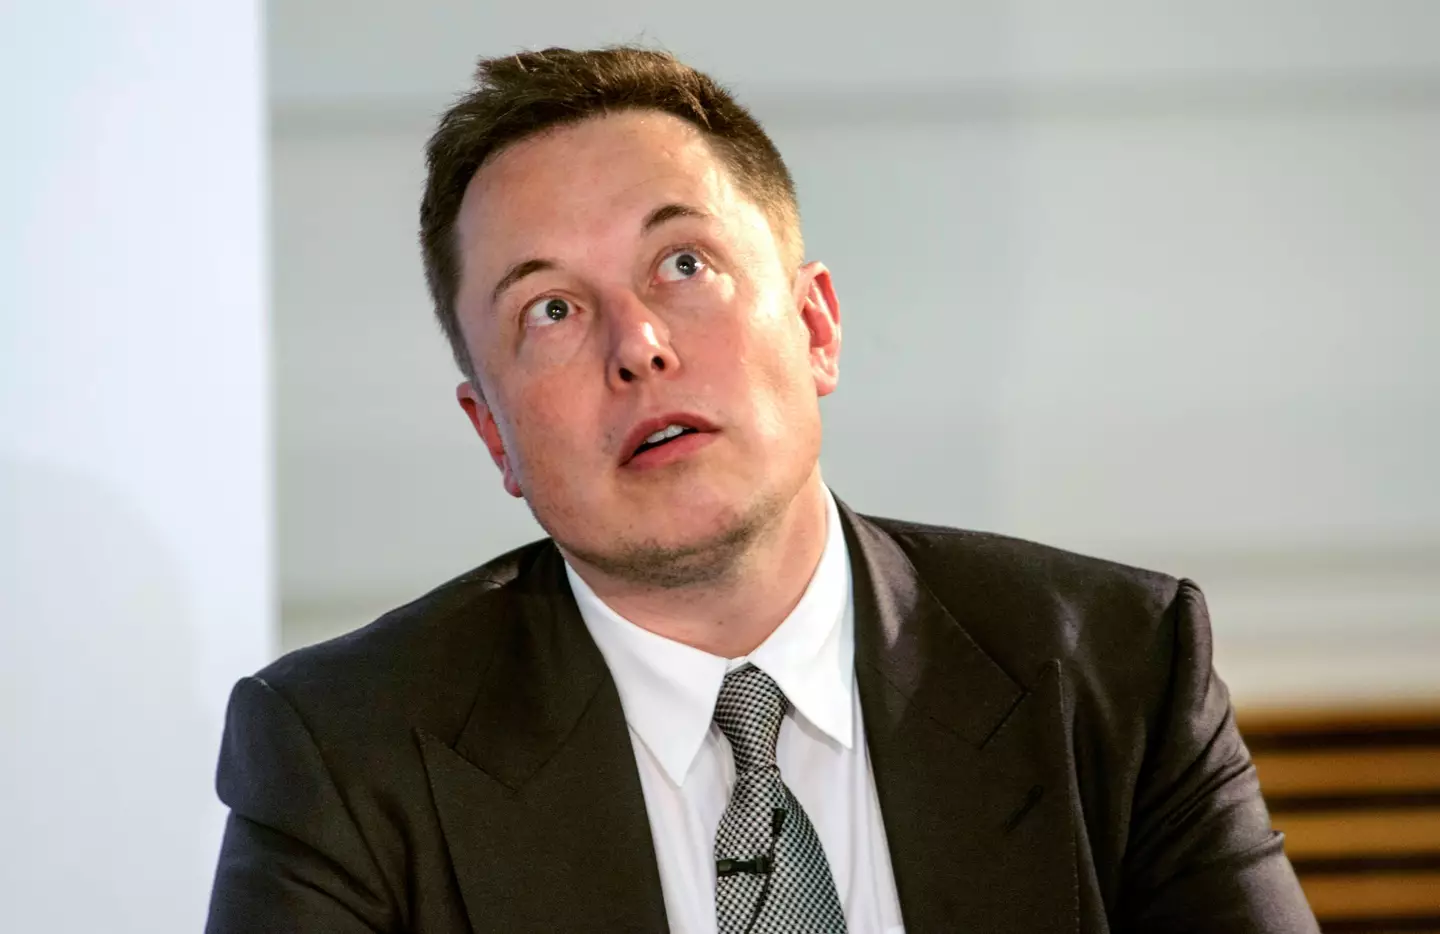 Musk allegedly 'whipped out his penis'.